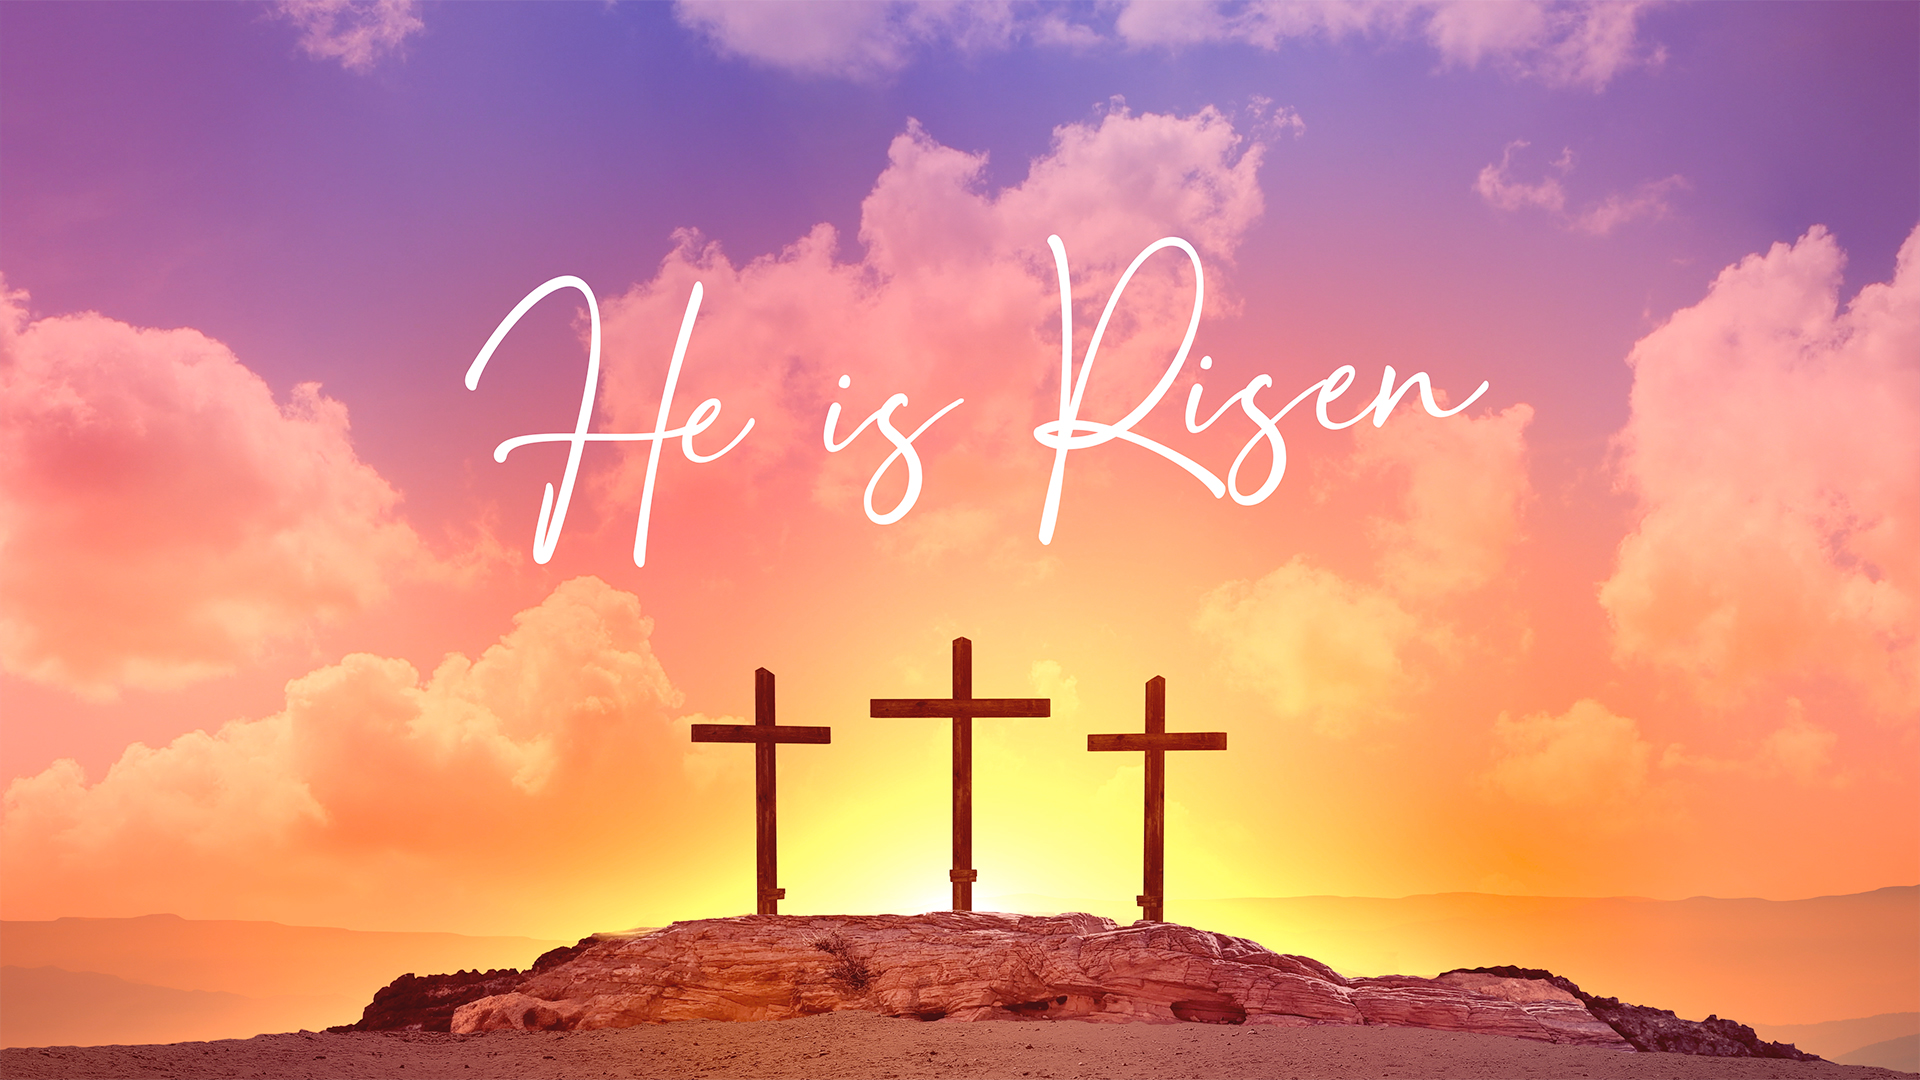 easter_sunday_he_is_risen-Wide 16x9 image